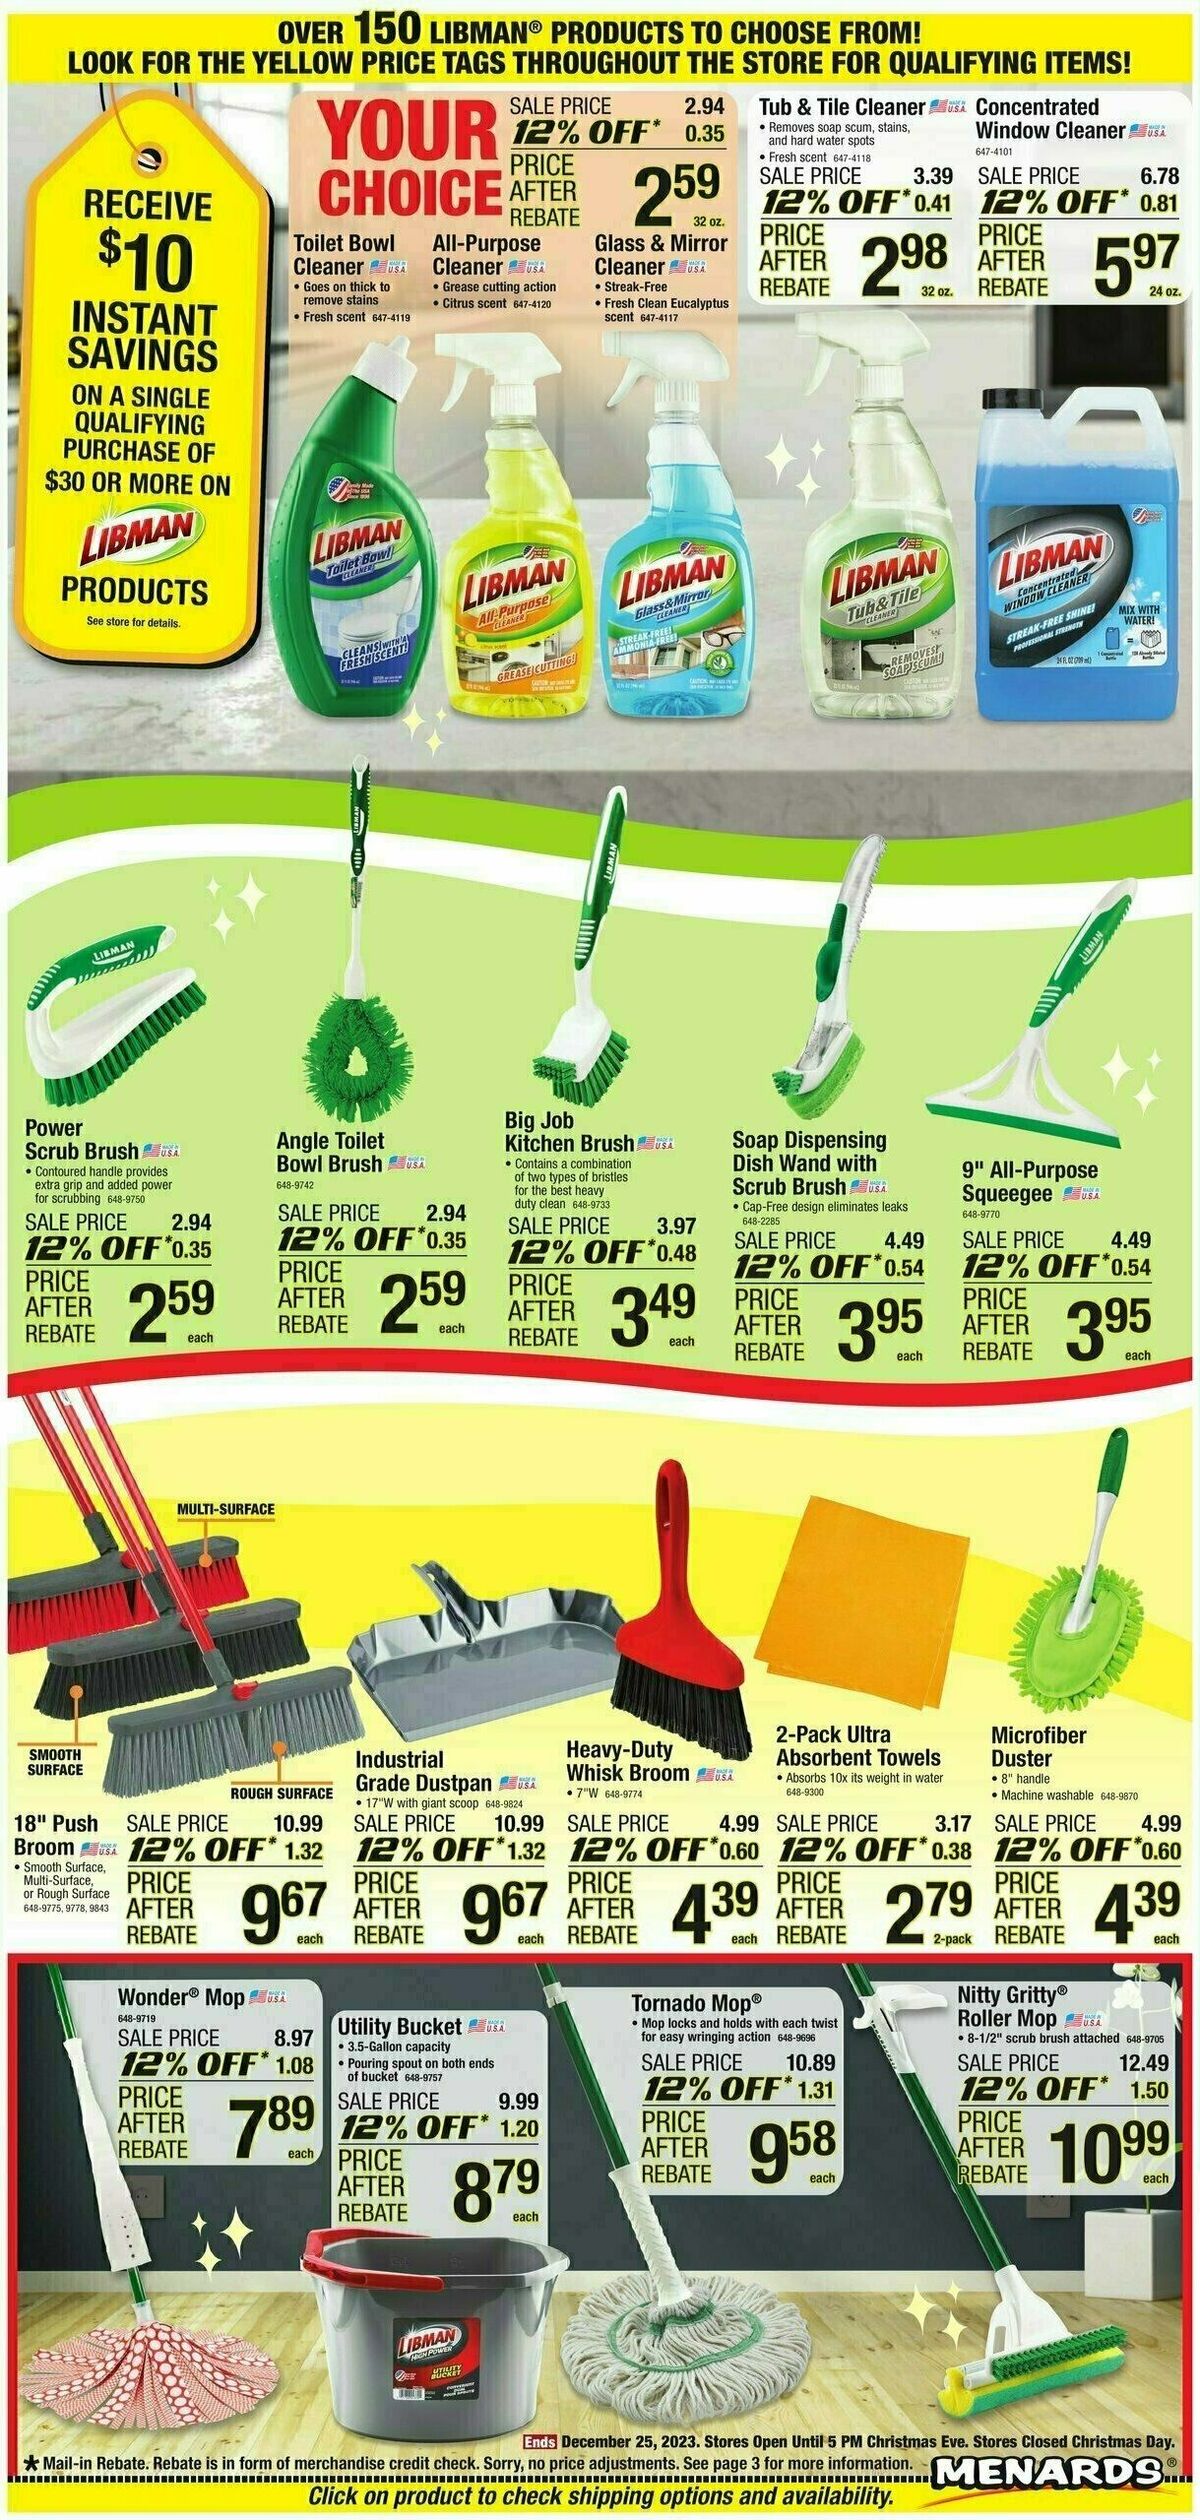 Menards Home Essentials Weekly Ad from December 12